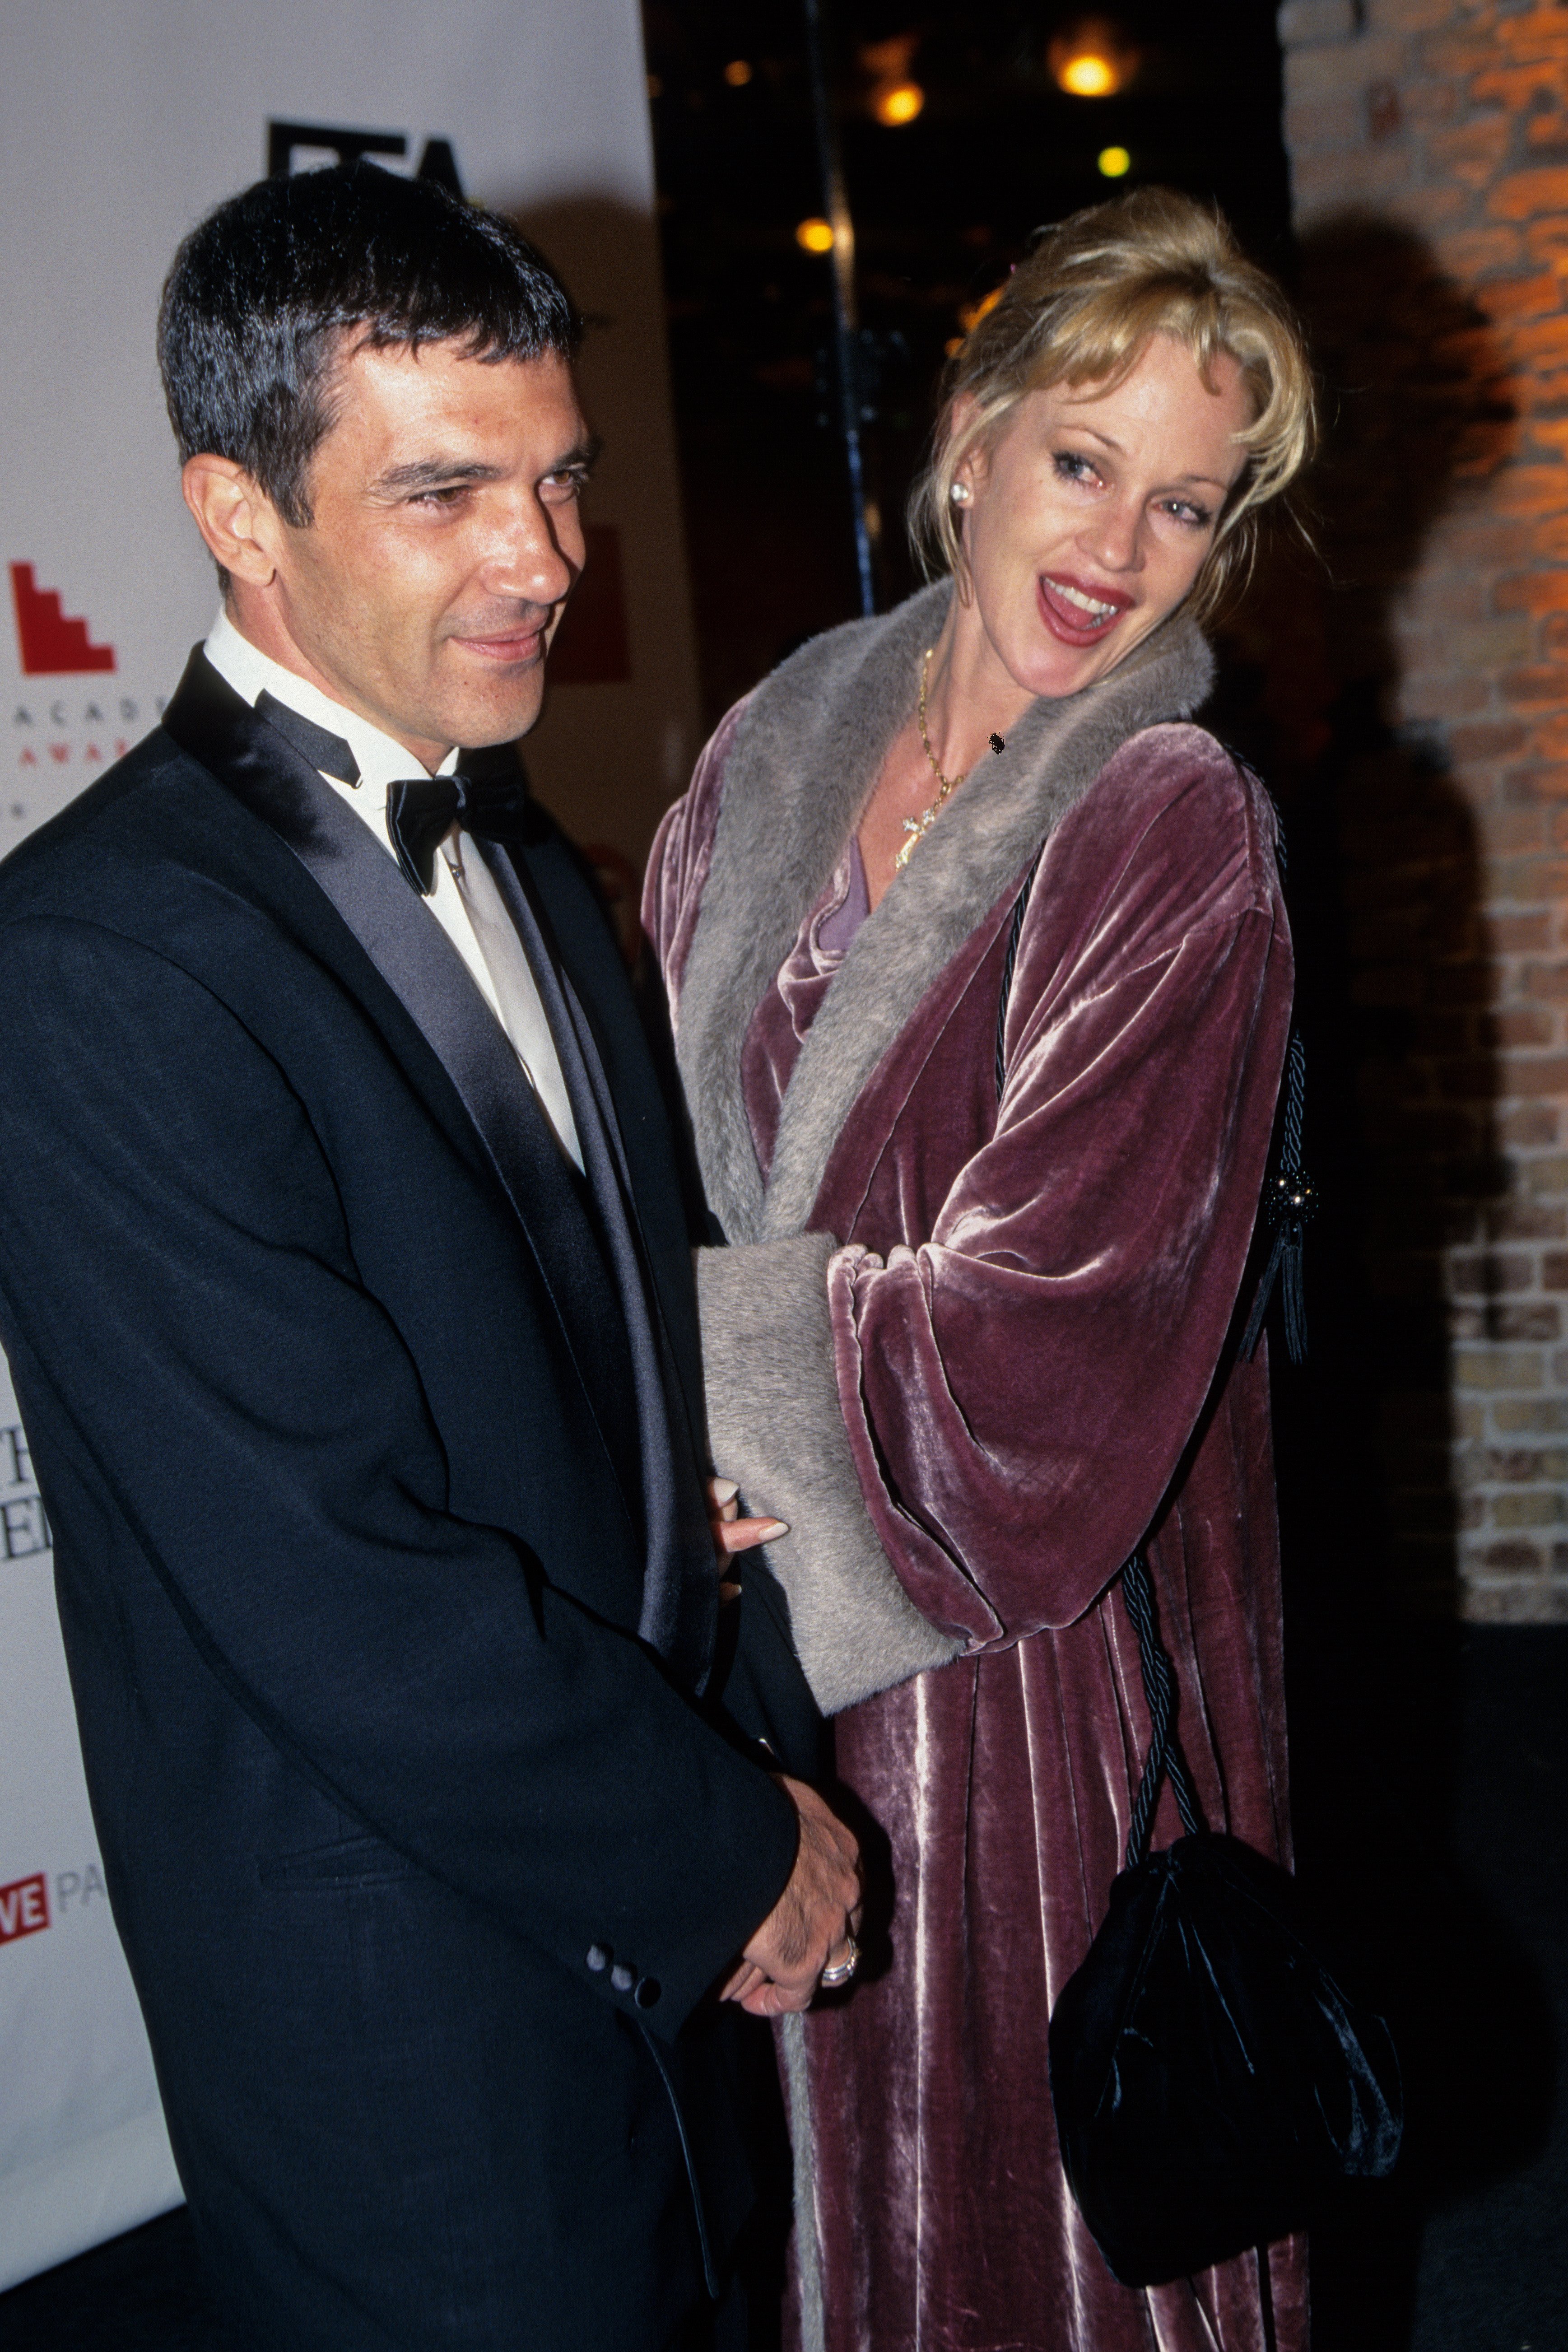 Antonio Banderas and Melanie Griffith at the European Film Award in December, 1999 in Berlin, Germany. | Source: Getty Images